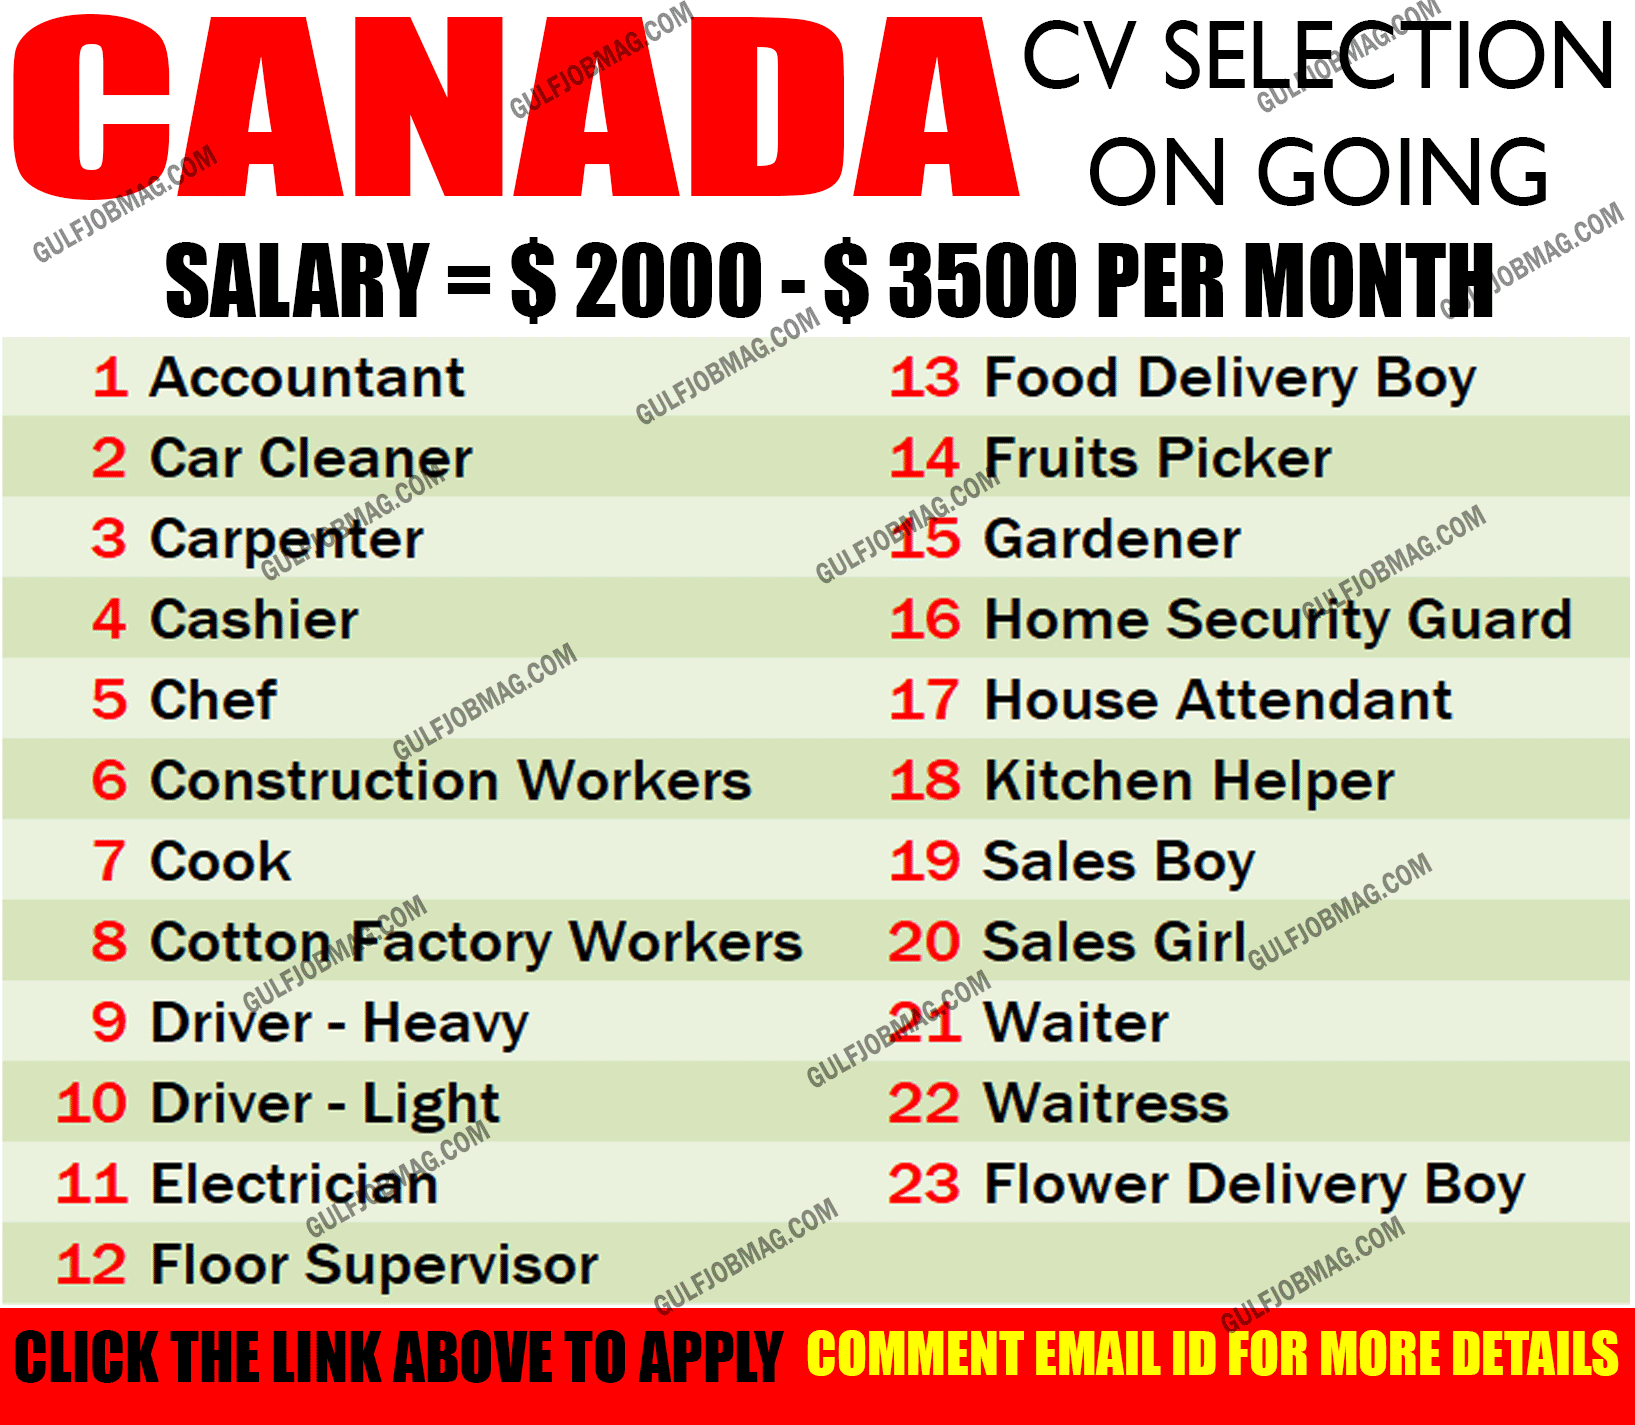 How to apply for a job in canada